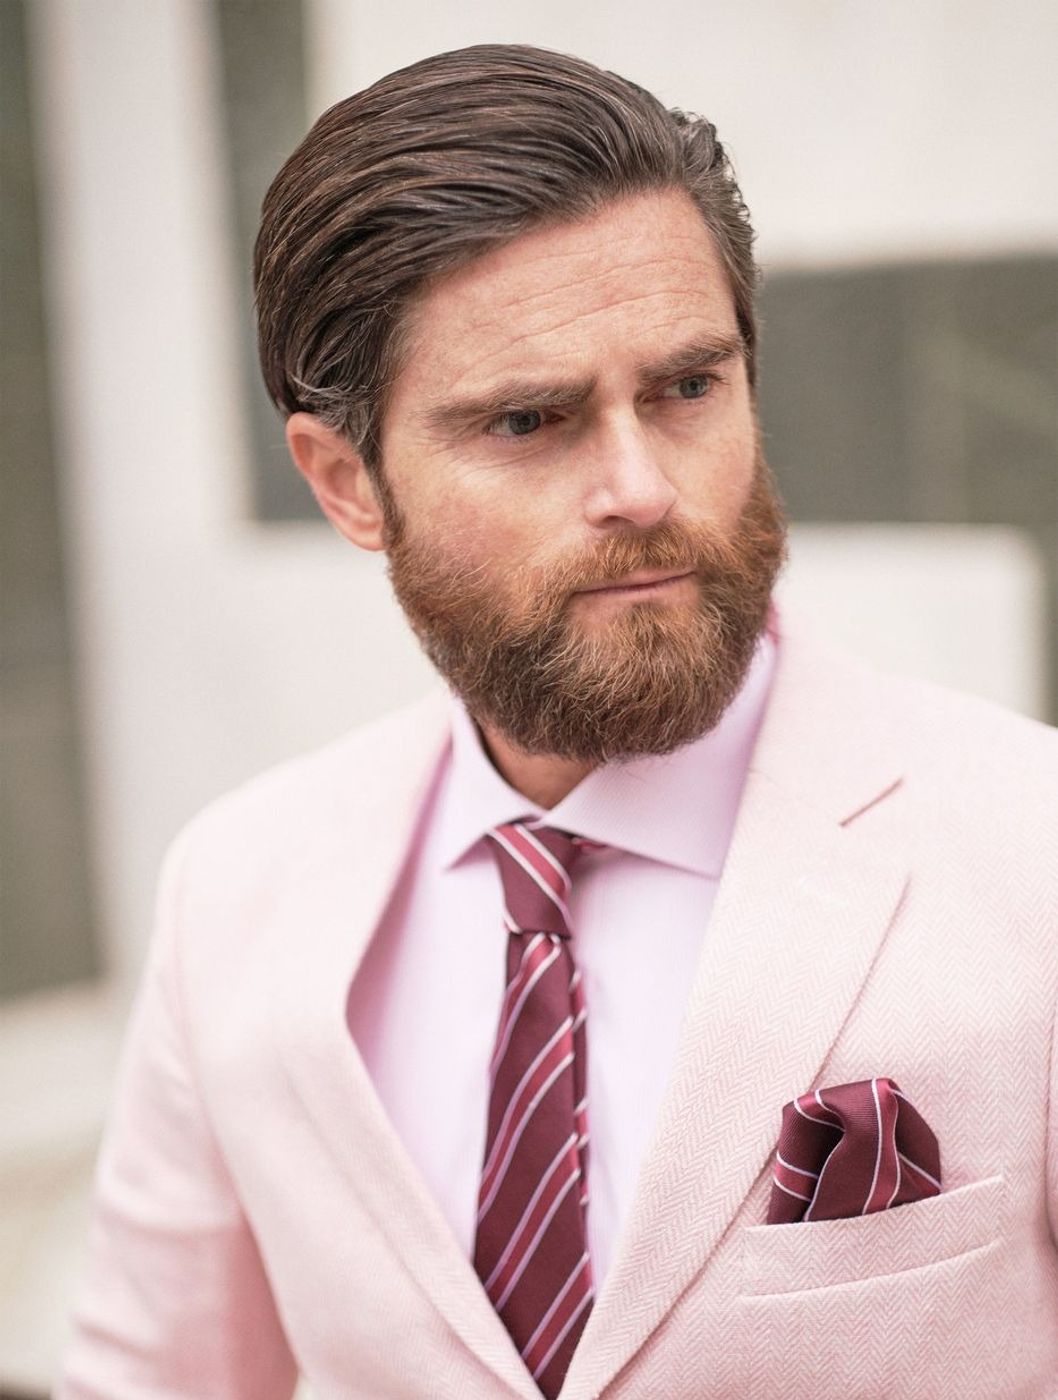 Pink dress shirt and suit outfit for men